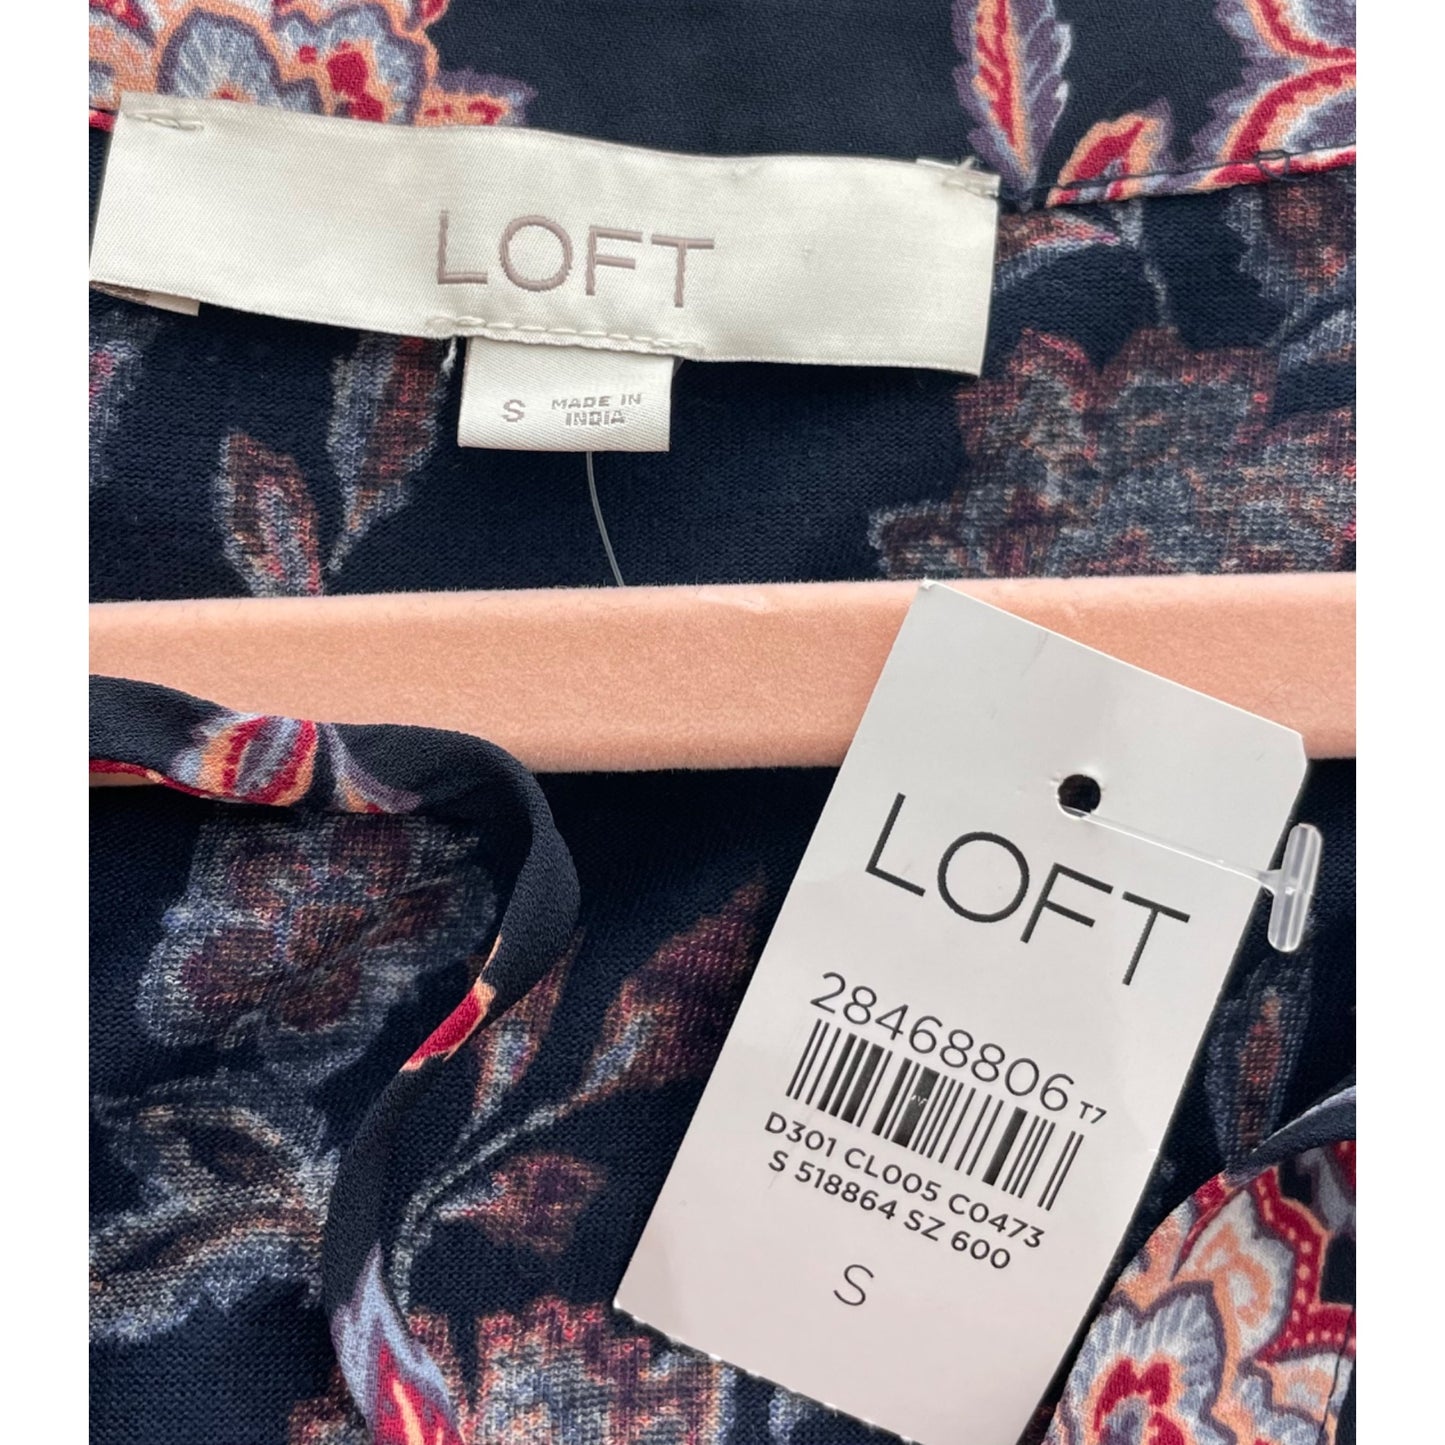 NWT LOFT Women's Size Small Navy/Multi-Colored Floral Print Long-Sleeved Blouse